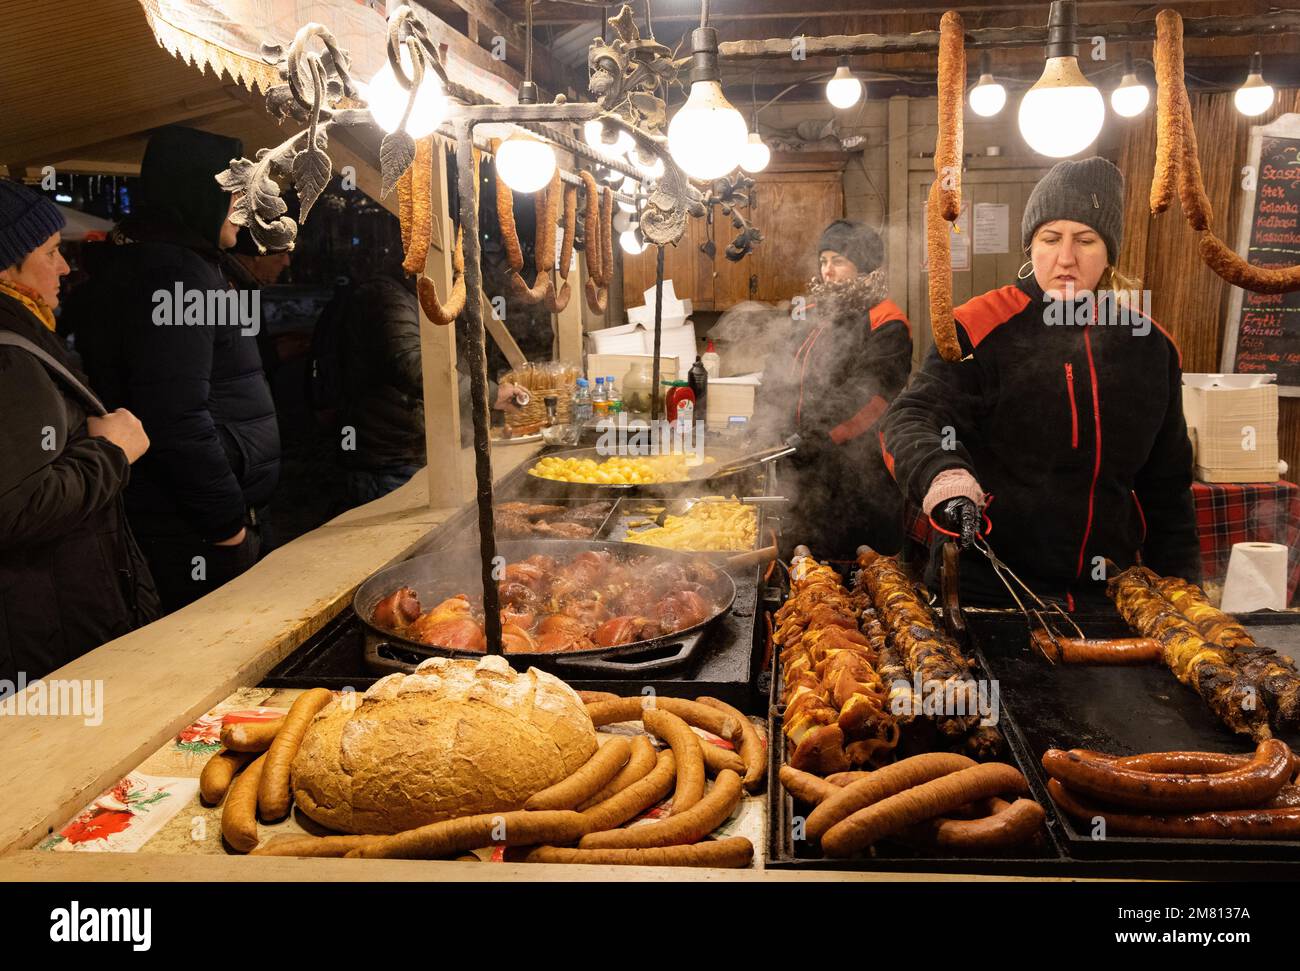 Krakow Christmas Market Krakow Poland - cooking meat at a food stall in the Main Market Square at night, Krakow Old Town, Poland Europe Stock Photo